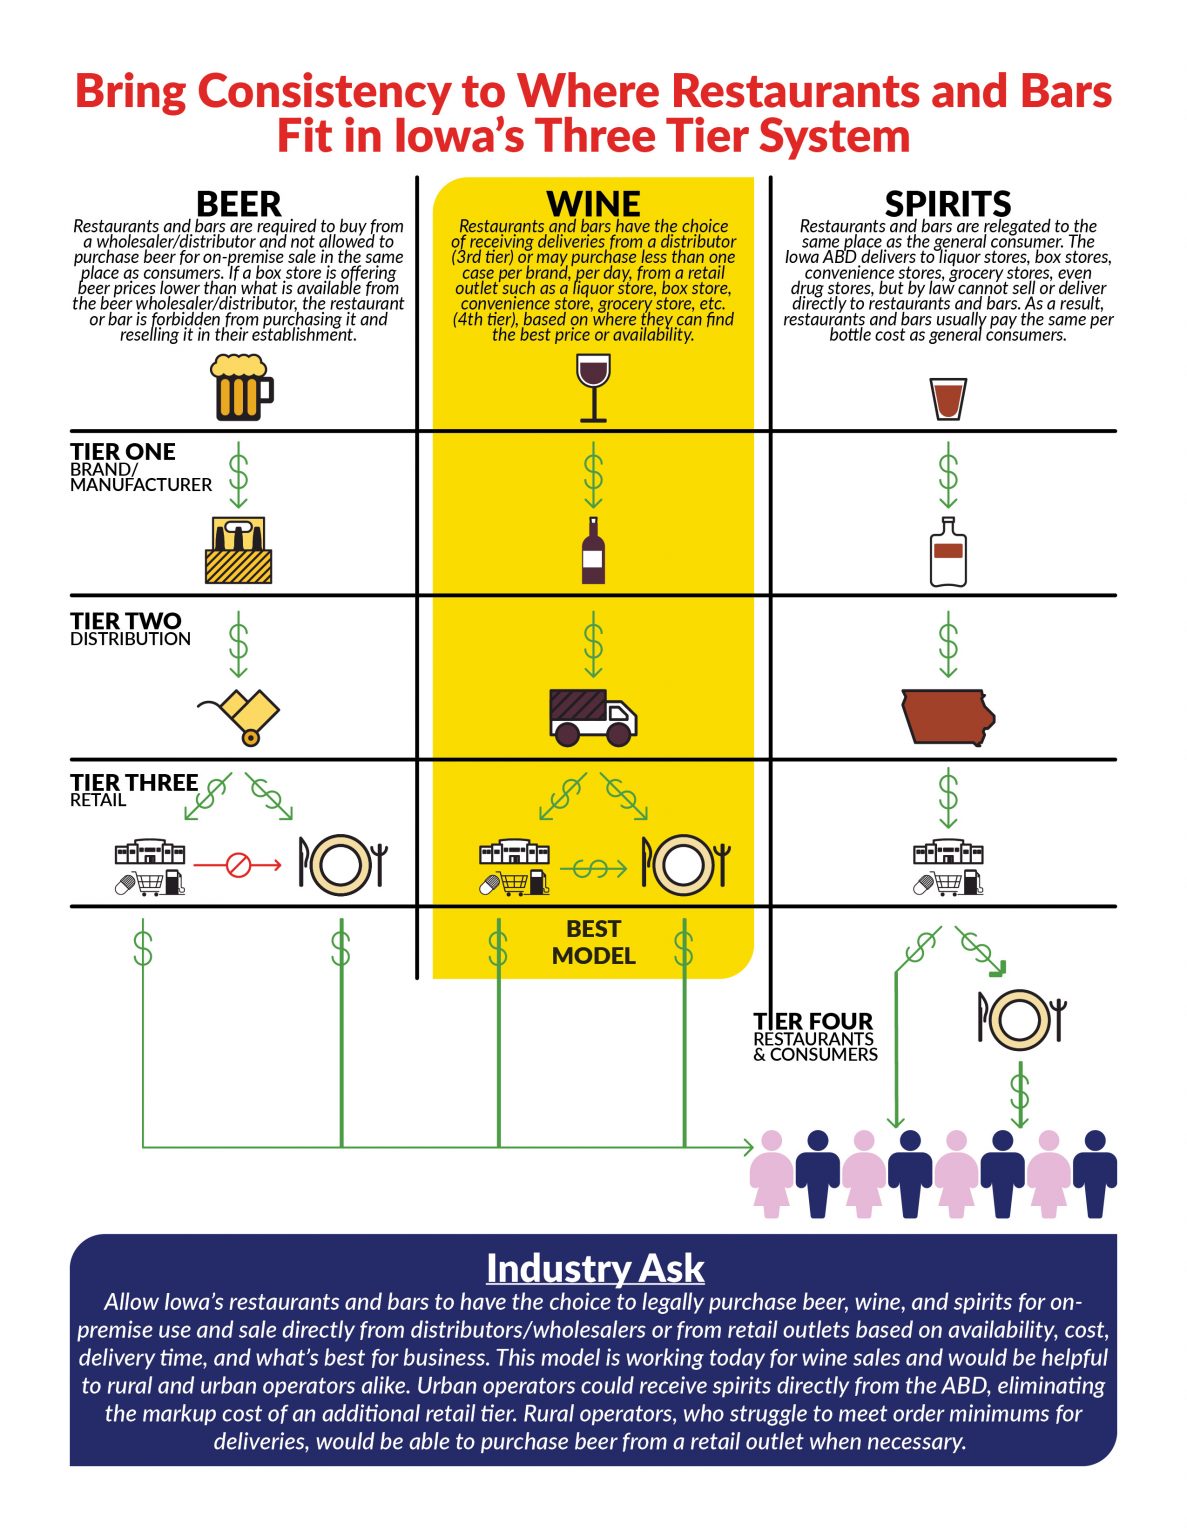 business plan for alcohol distribution